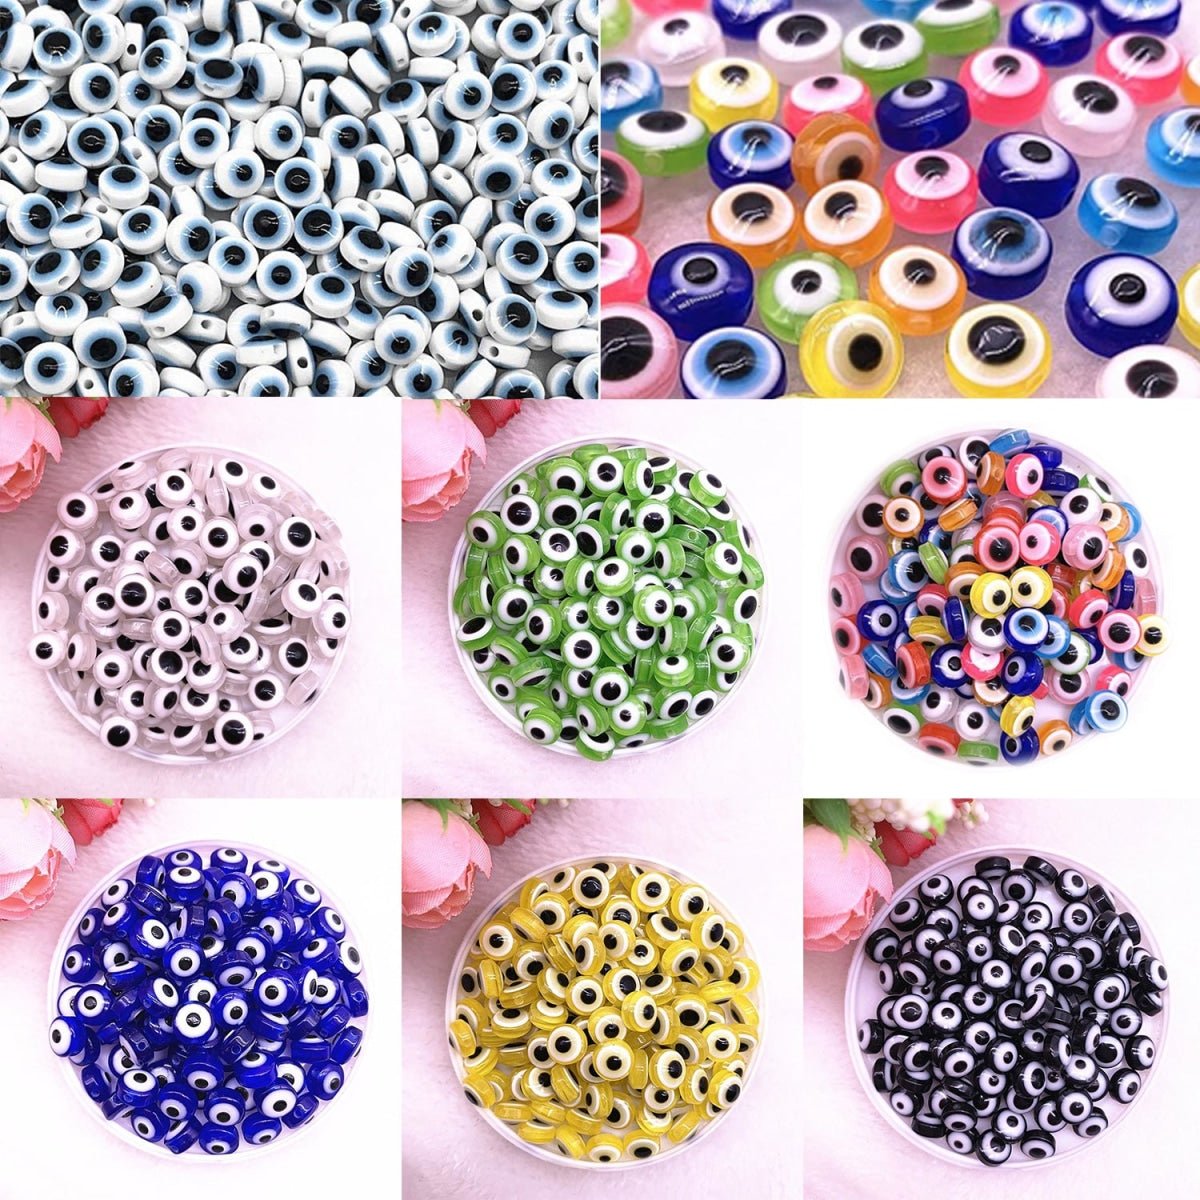 48pcs 8/10mm Oval Resin Spacer Beads Double Sided Eyes for Jewellery Making DIY Bracelet Beads Set B - Green 8mm - - Asia Sell